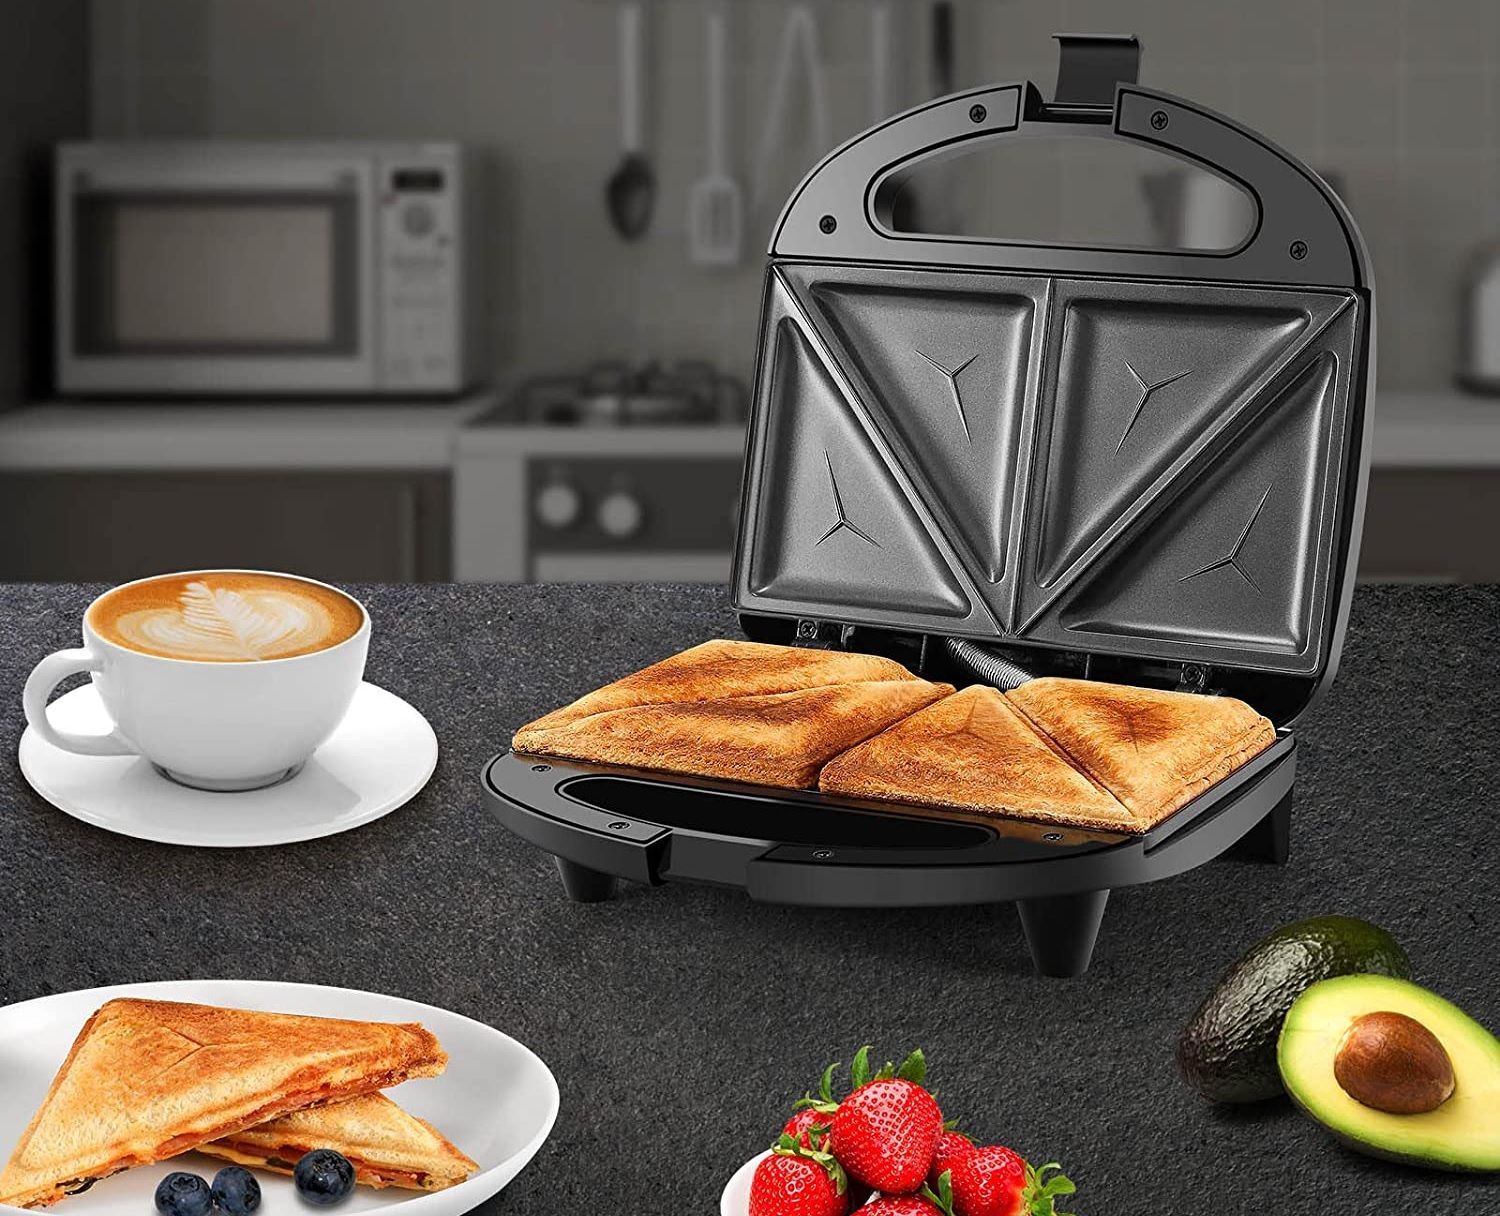 ostba sandwich maker cooking waffles and grilled cheese sandwiches